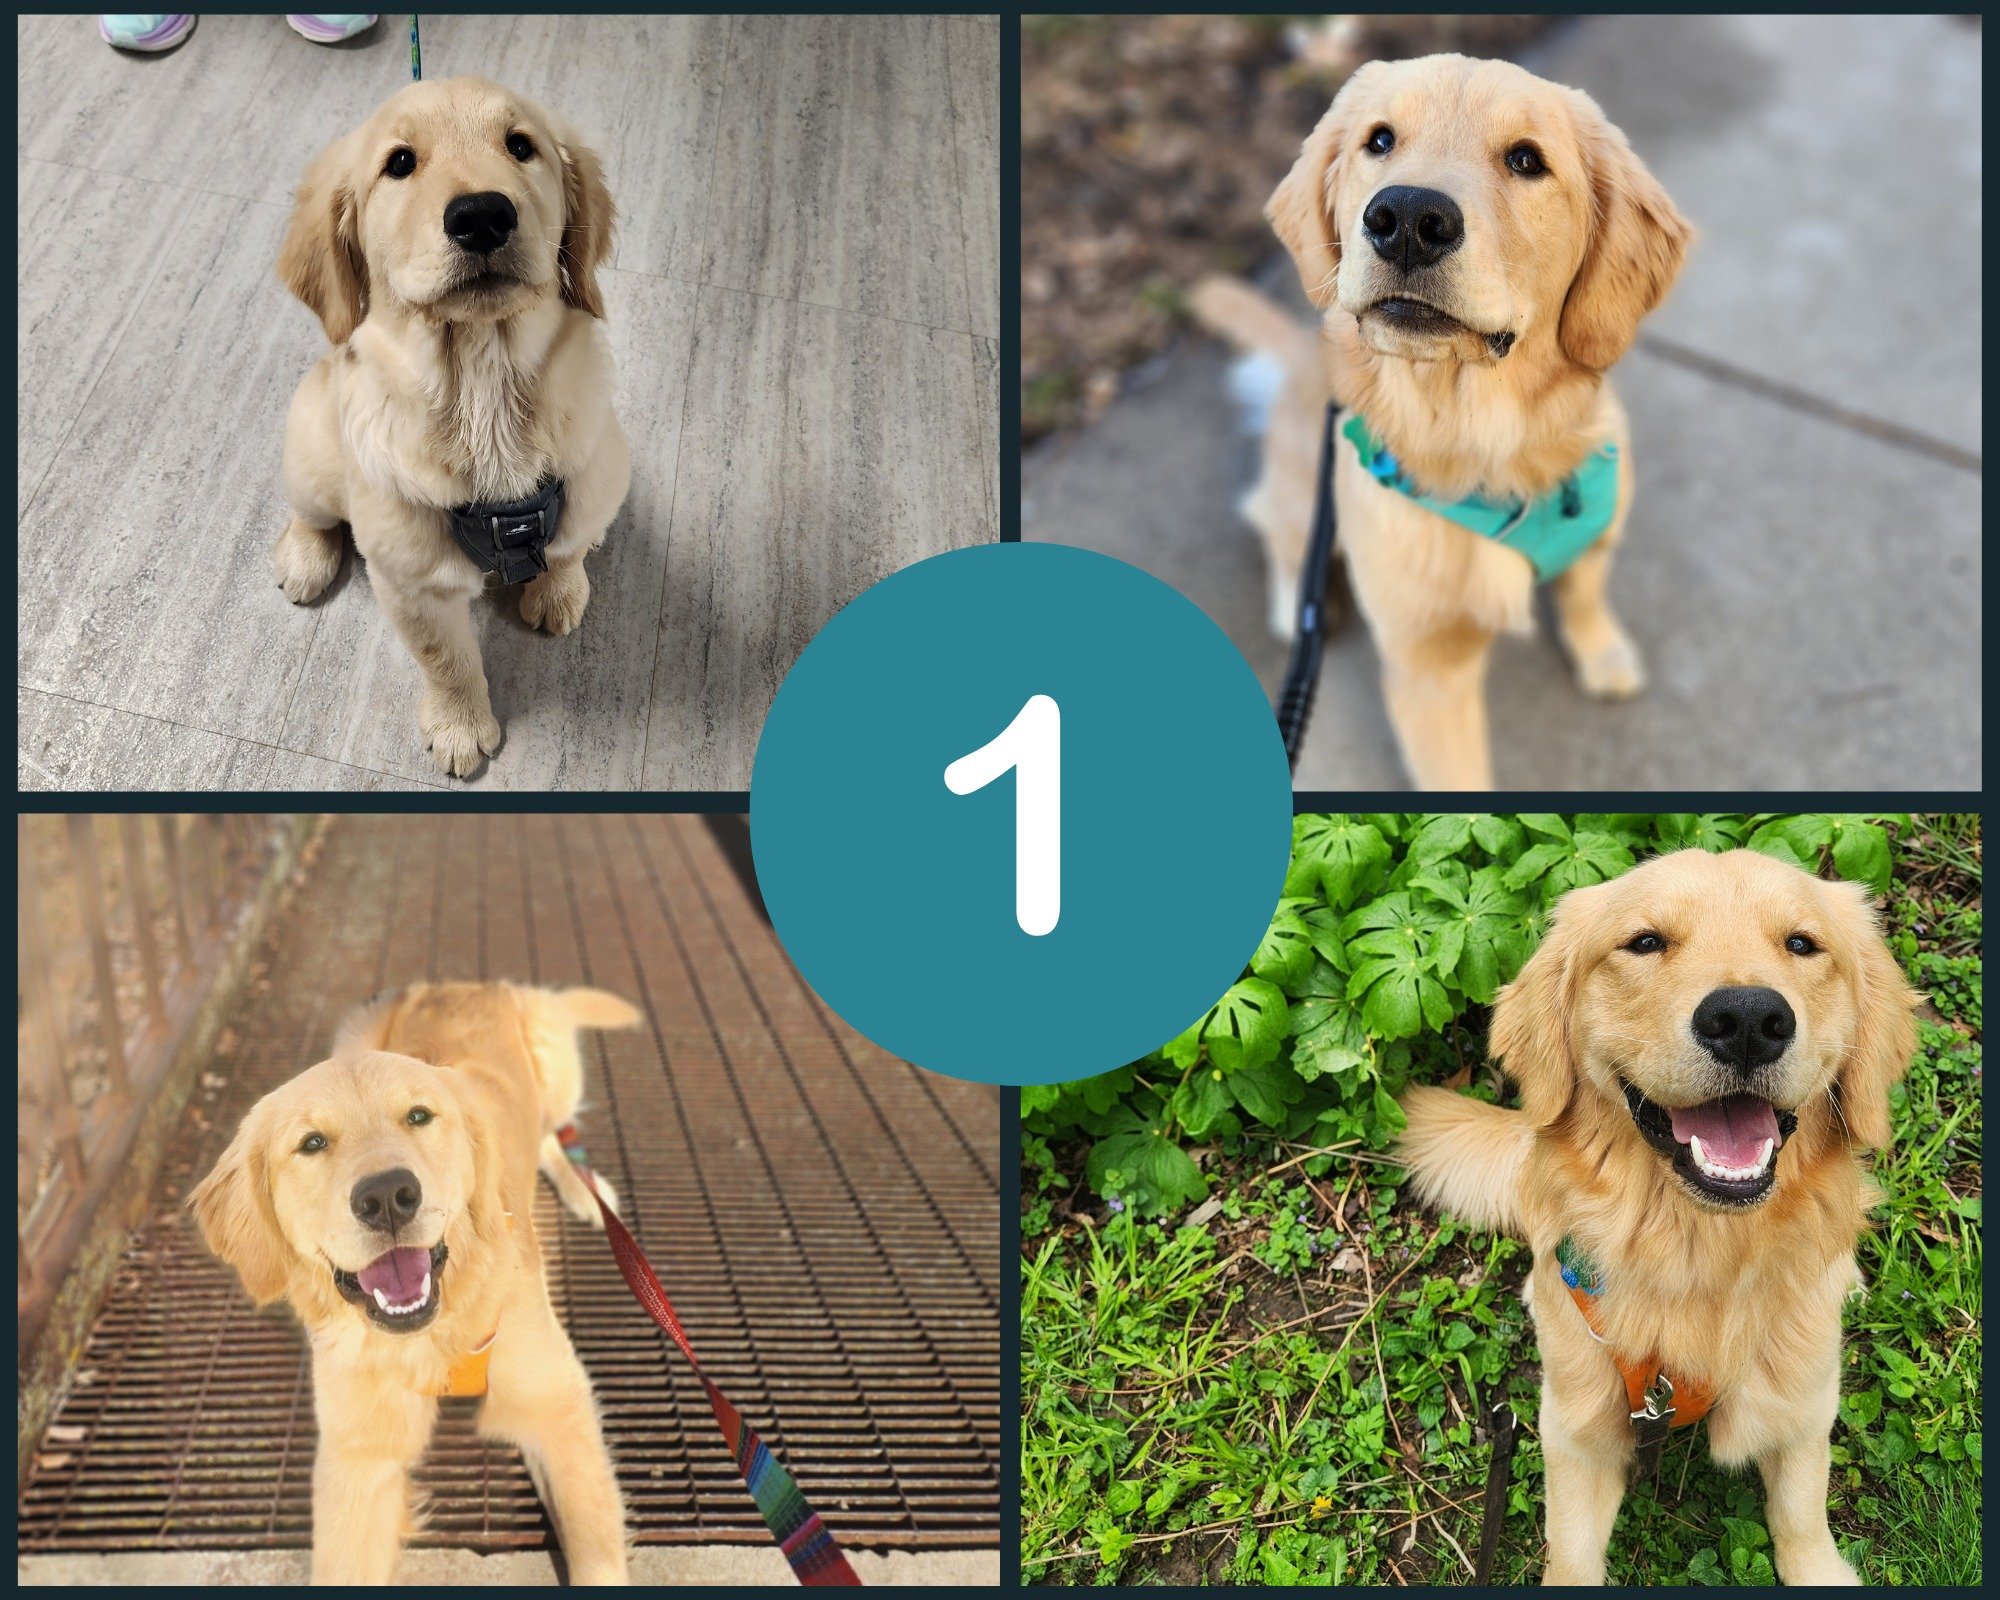 🎊What's today? It's Sammich's first birthday, of course! We're so happy to have known this pup for his whole first year! From being the smallest in his puppy class but still confident and curious, to the smart, social, ready for anything adolescent 